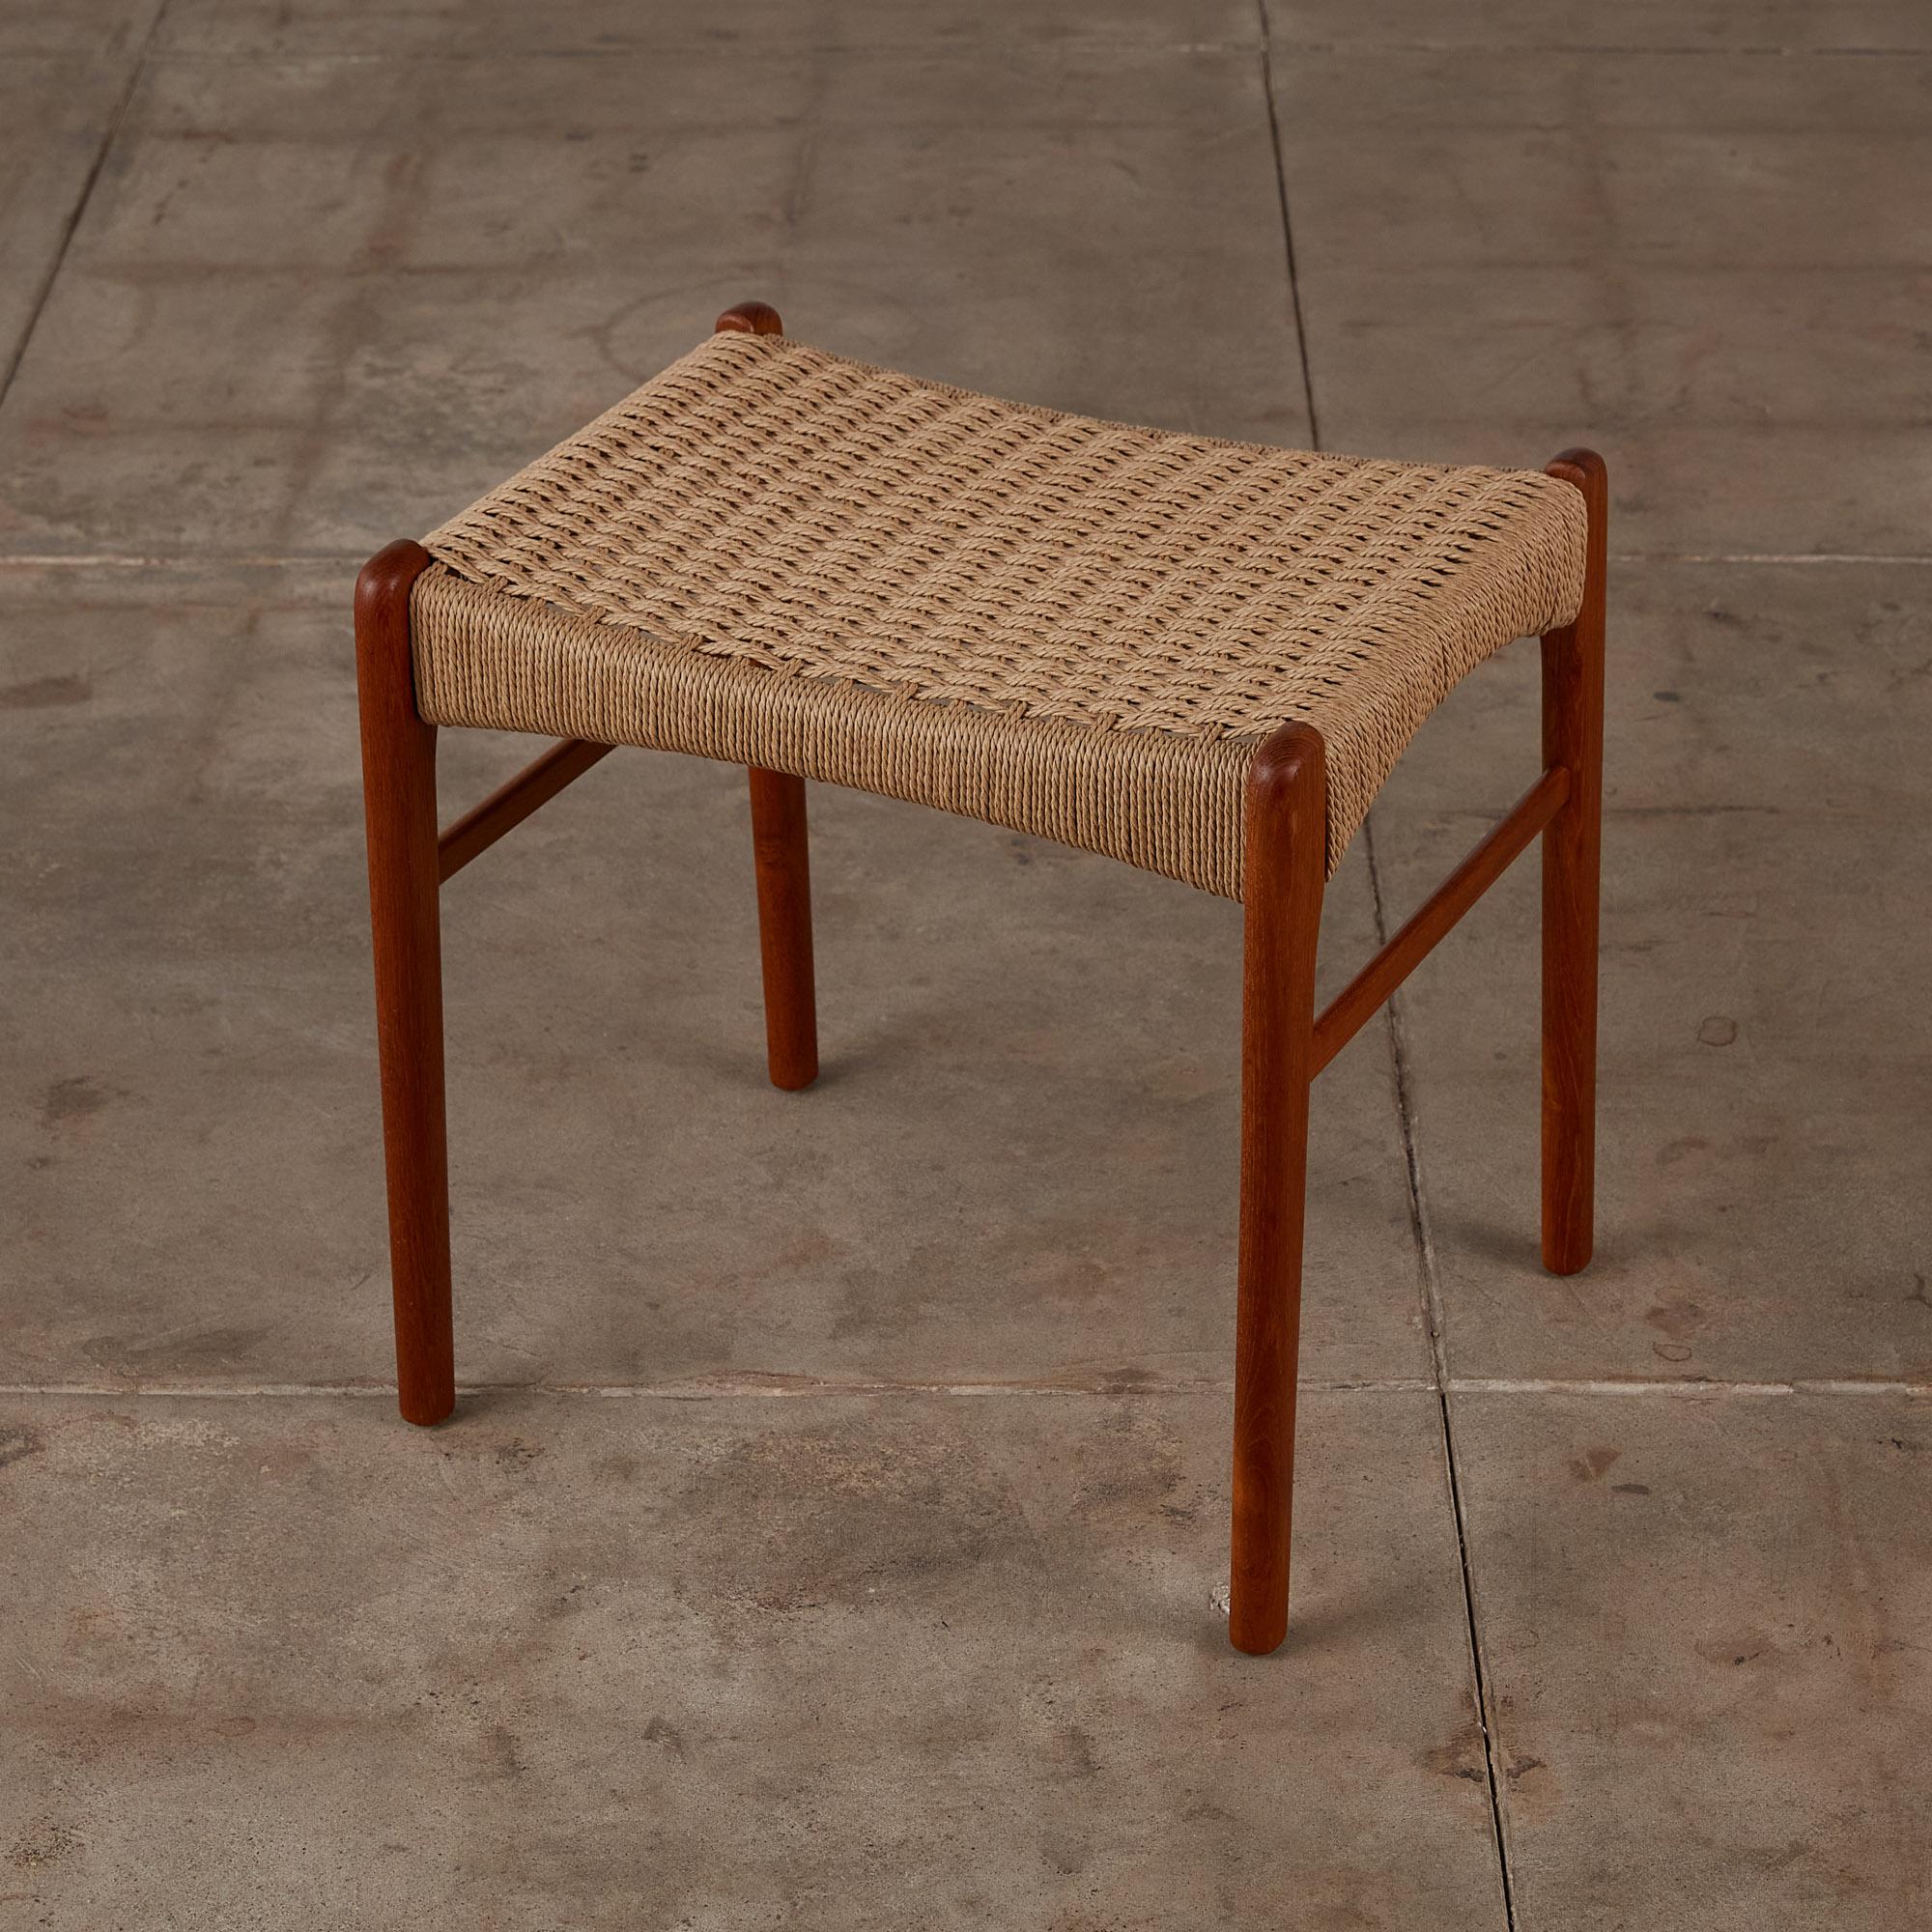 Teak stool by Peder Kristensen for Glyngøre Stolefabrick, Denmark c.1950s. This stool or ottoman features an oiled teak frame with teak stretchers, and a newly woven Danish cord seat according to original design. This Minimalist stool is perfect for